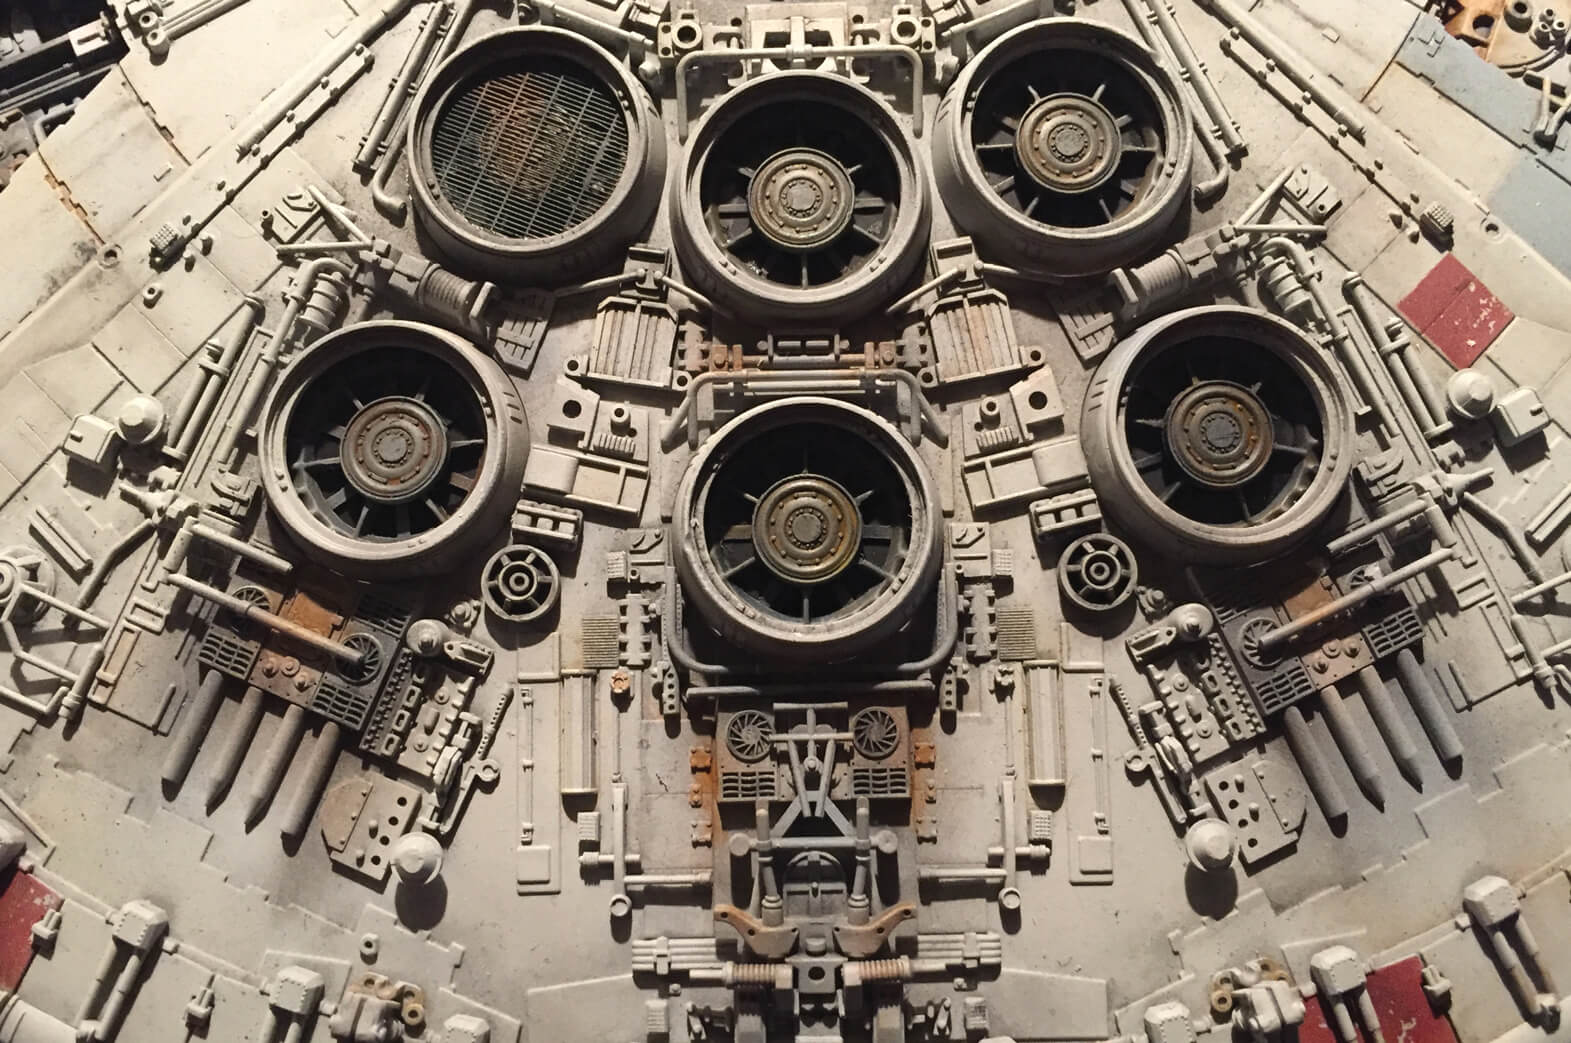 A close-up shot of the Millennium Falcon showing the intricate analogue greebling of its exterior. The designers of the “Star Wars” spaceship employed a number of repurposed elements from World War Two tank and aircraft model kits to achieve the effect.